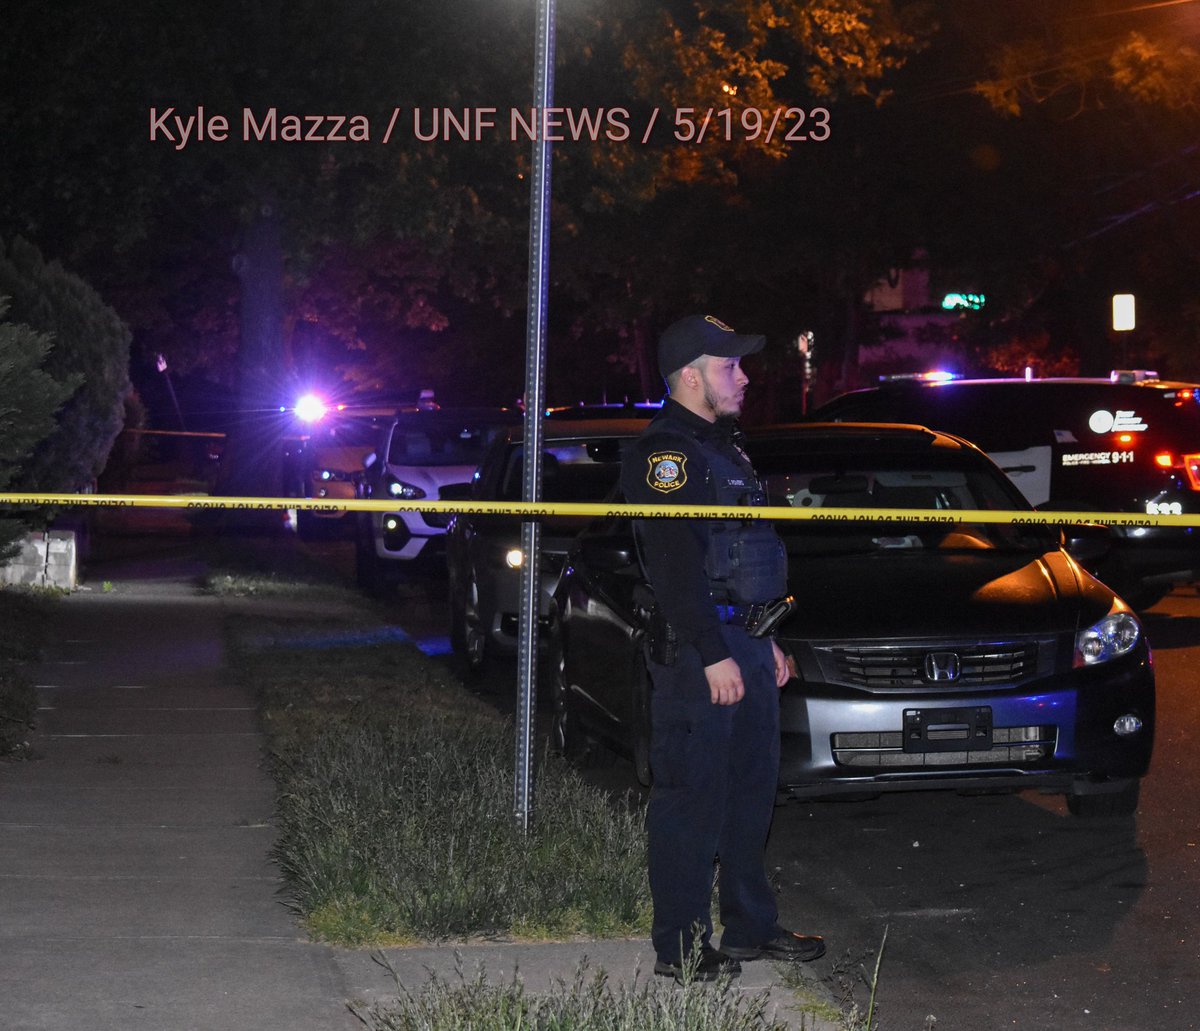 Fatal shooting leaves one person dead in Newark, New Jersey on May 19, 2023. One person was pronounced dead on scene at 11:12 PM Eastern Time, Friday evening after being shot on Stengel Avenue in Newark